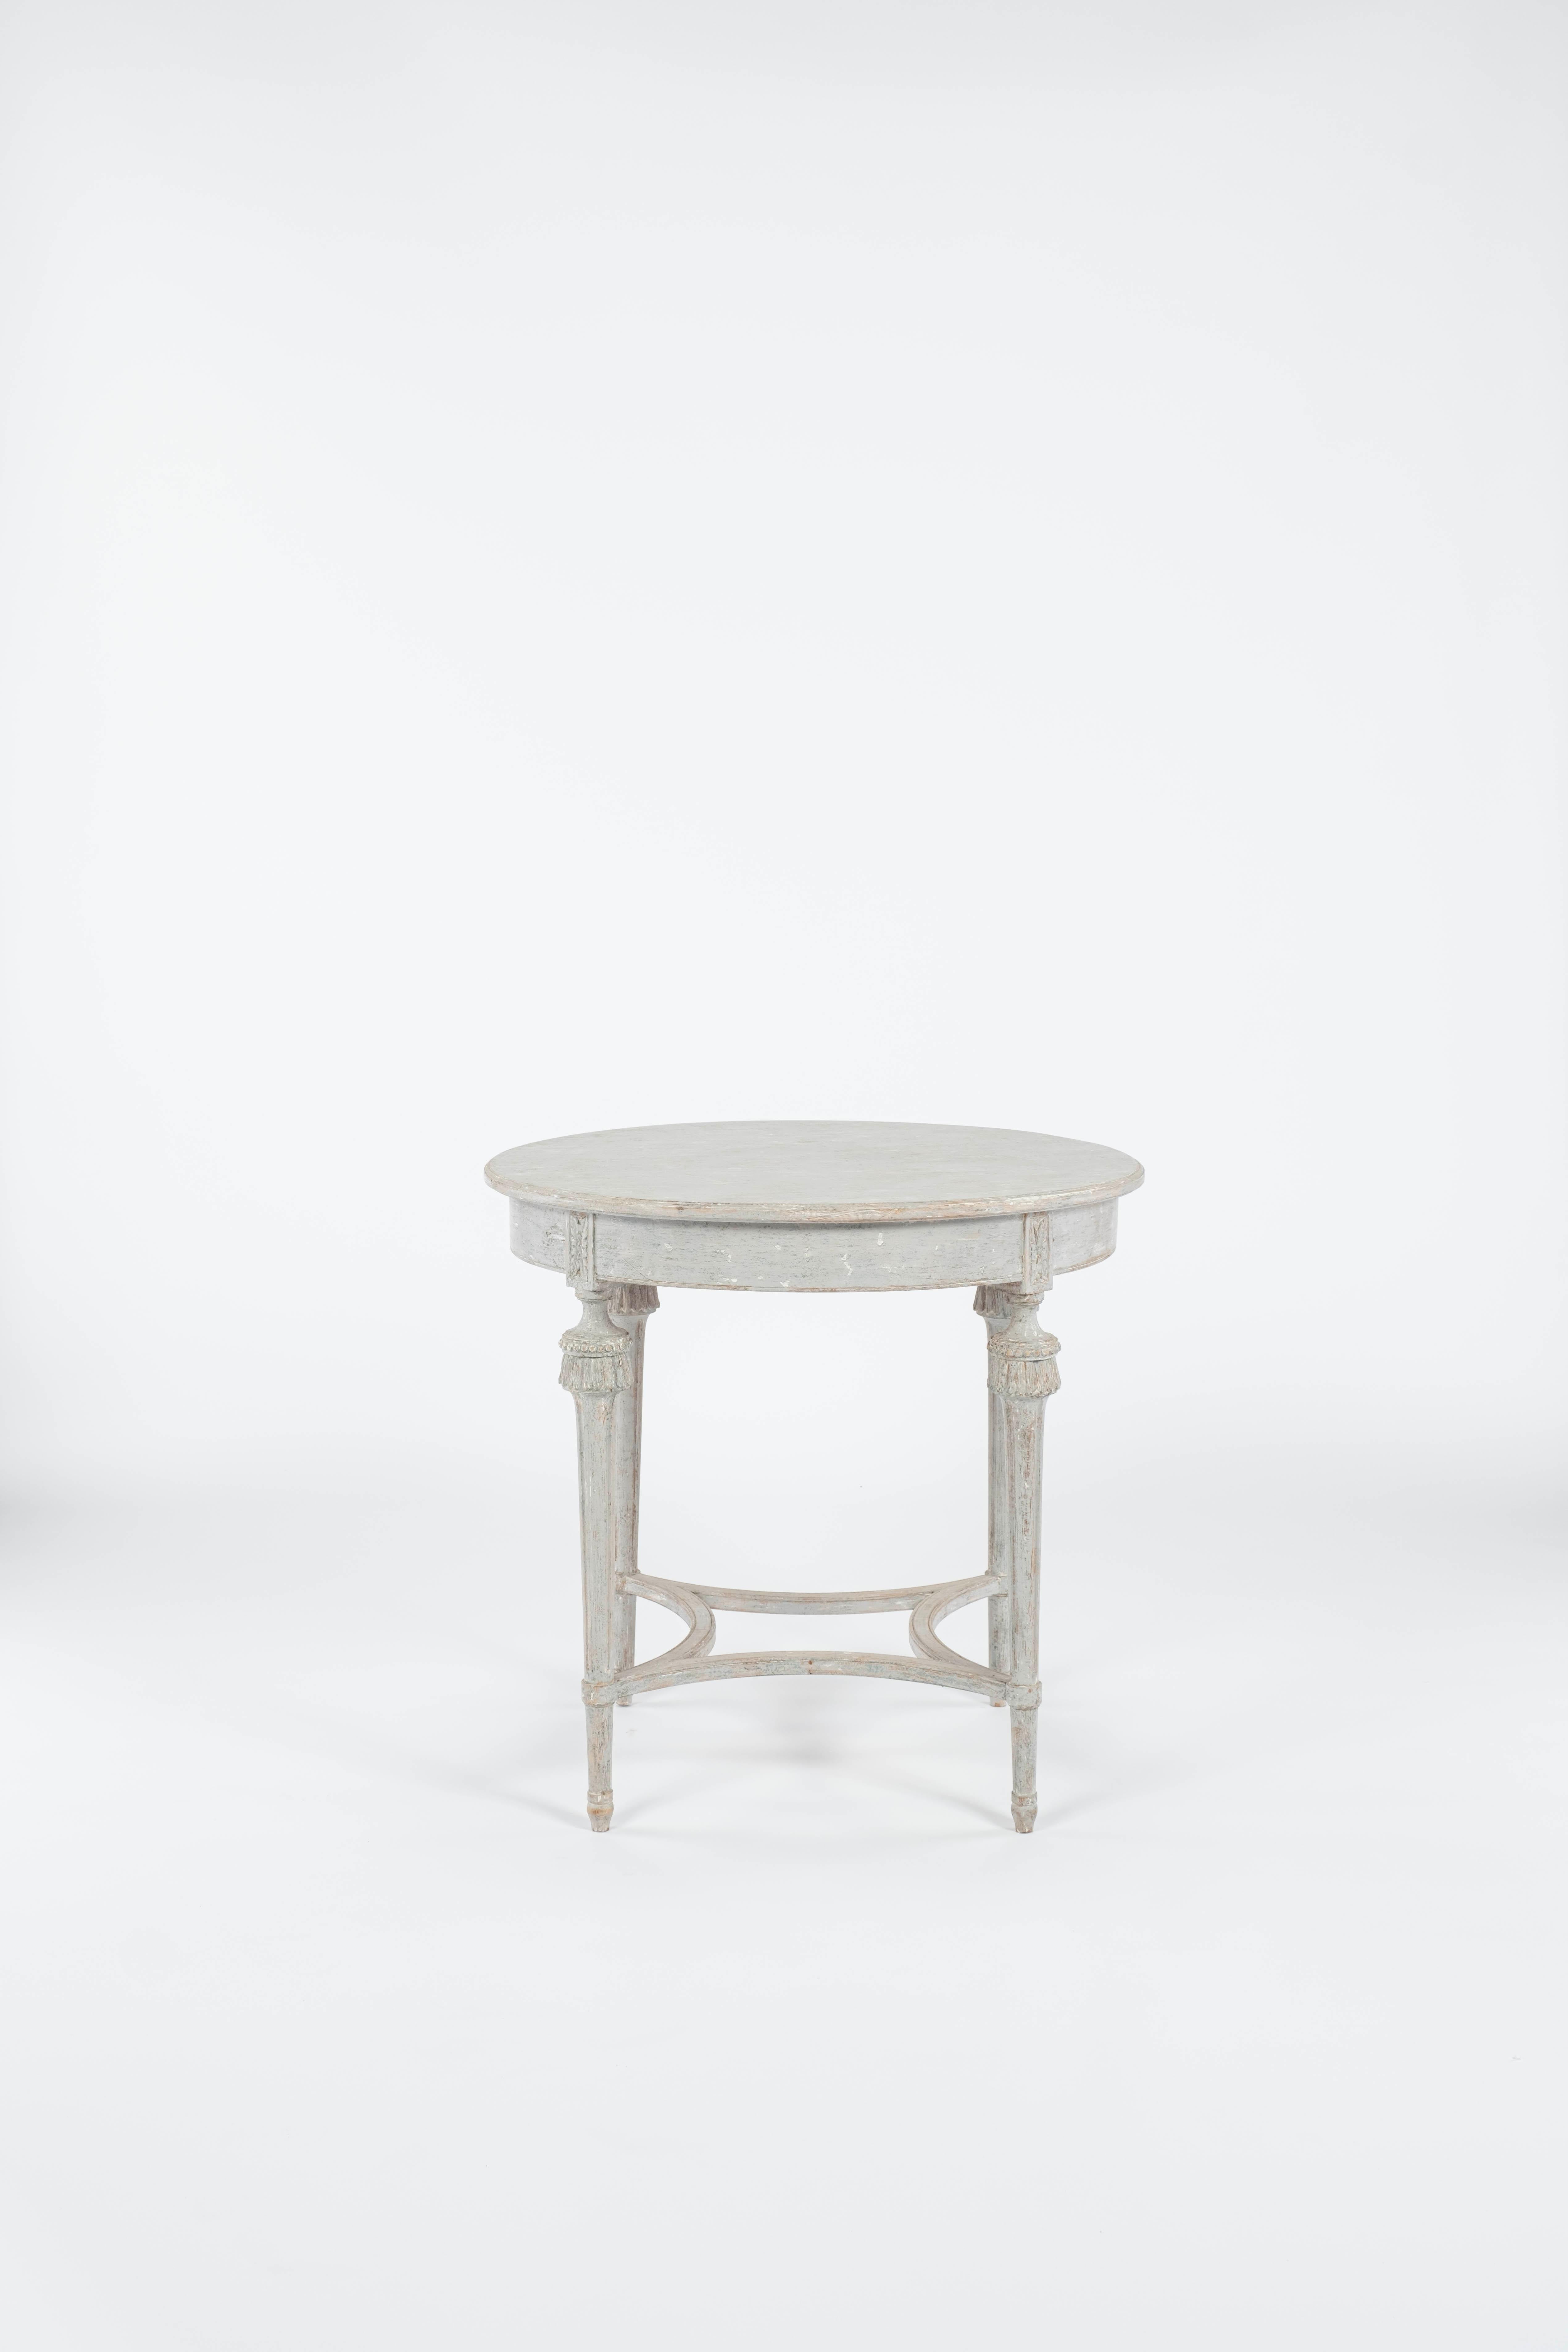 19th C. Gustavian Round Table In Good Condition For Sale In Houston, TX